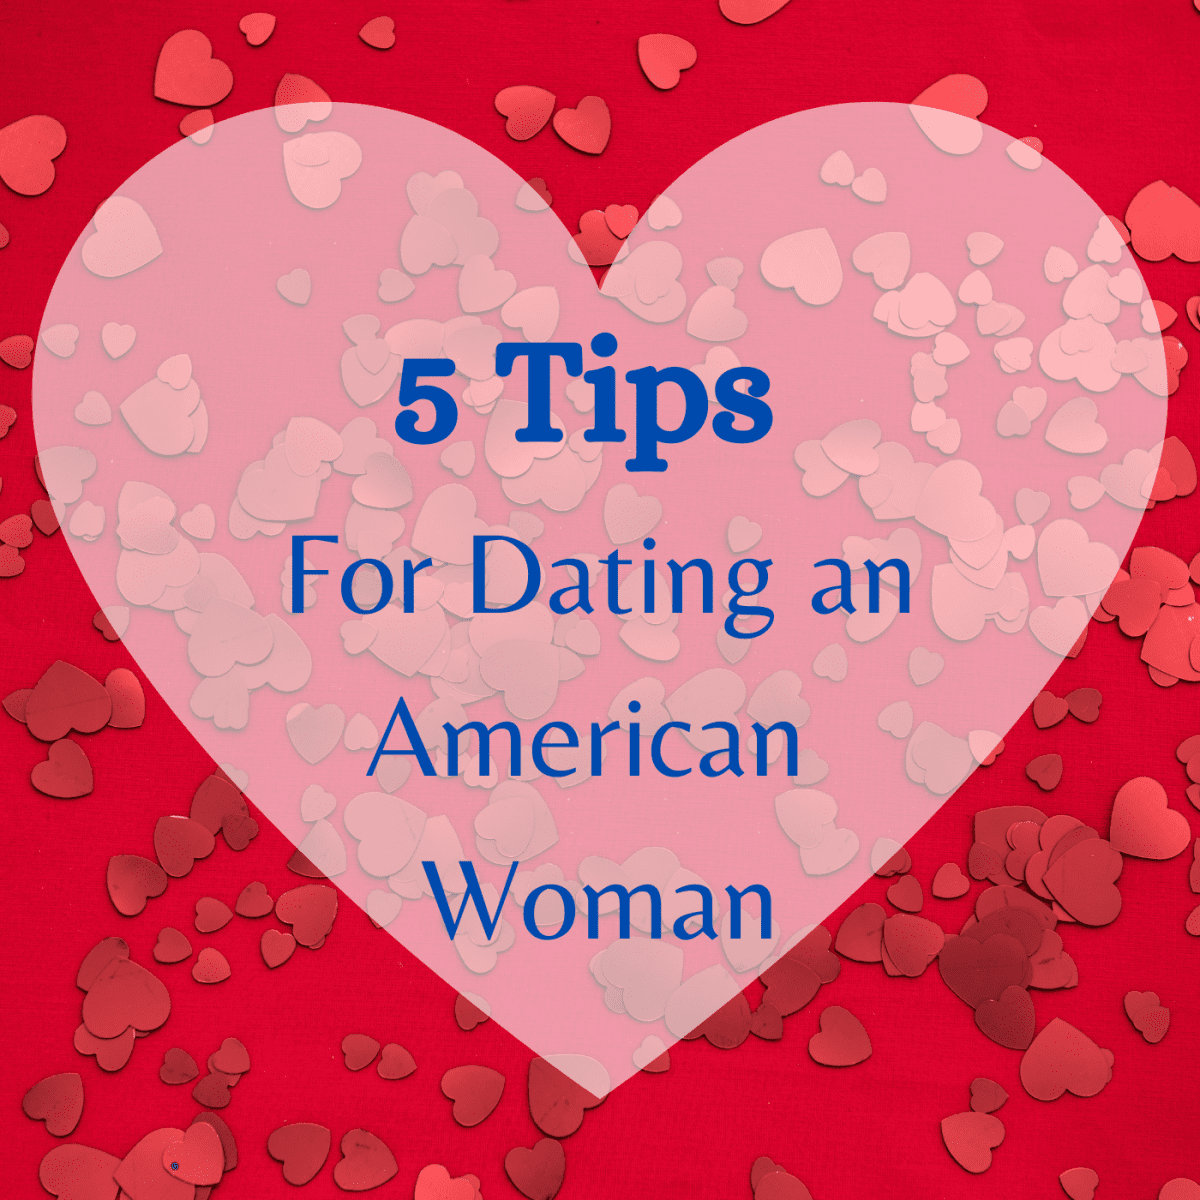 5 Tips for Dating an American Woman - PairedLife